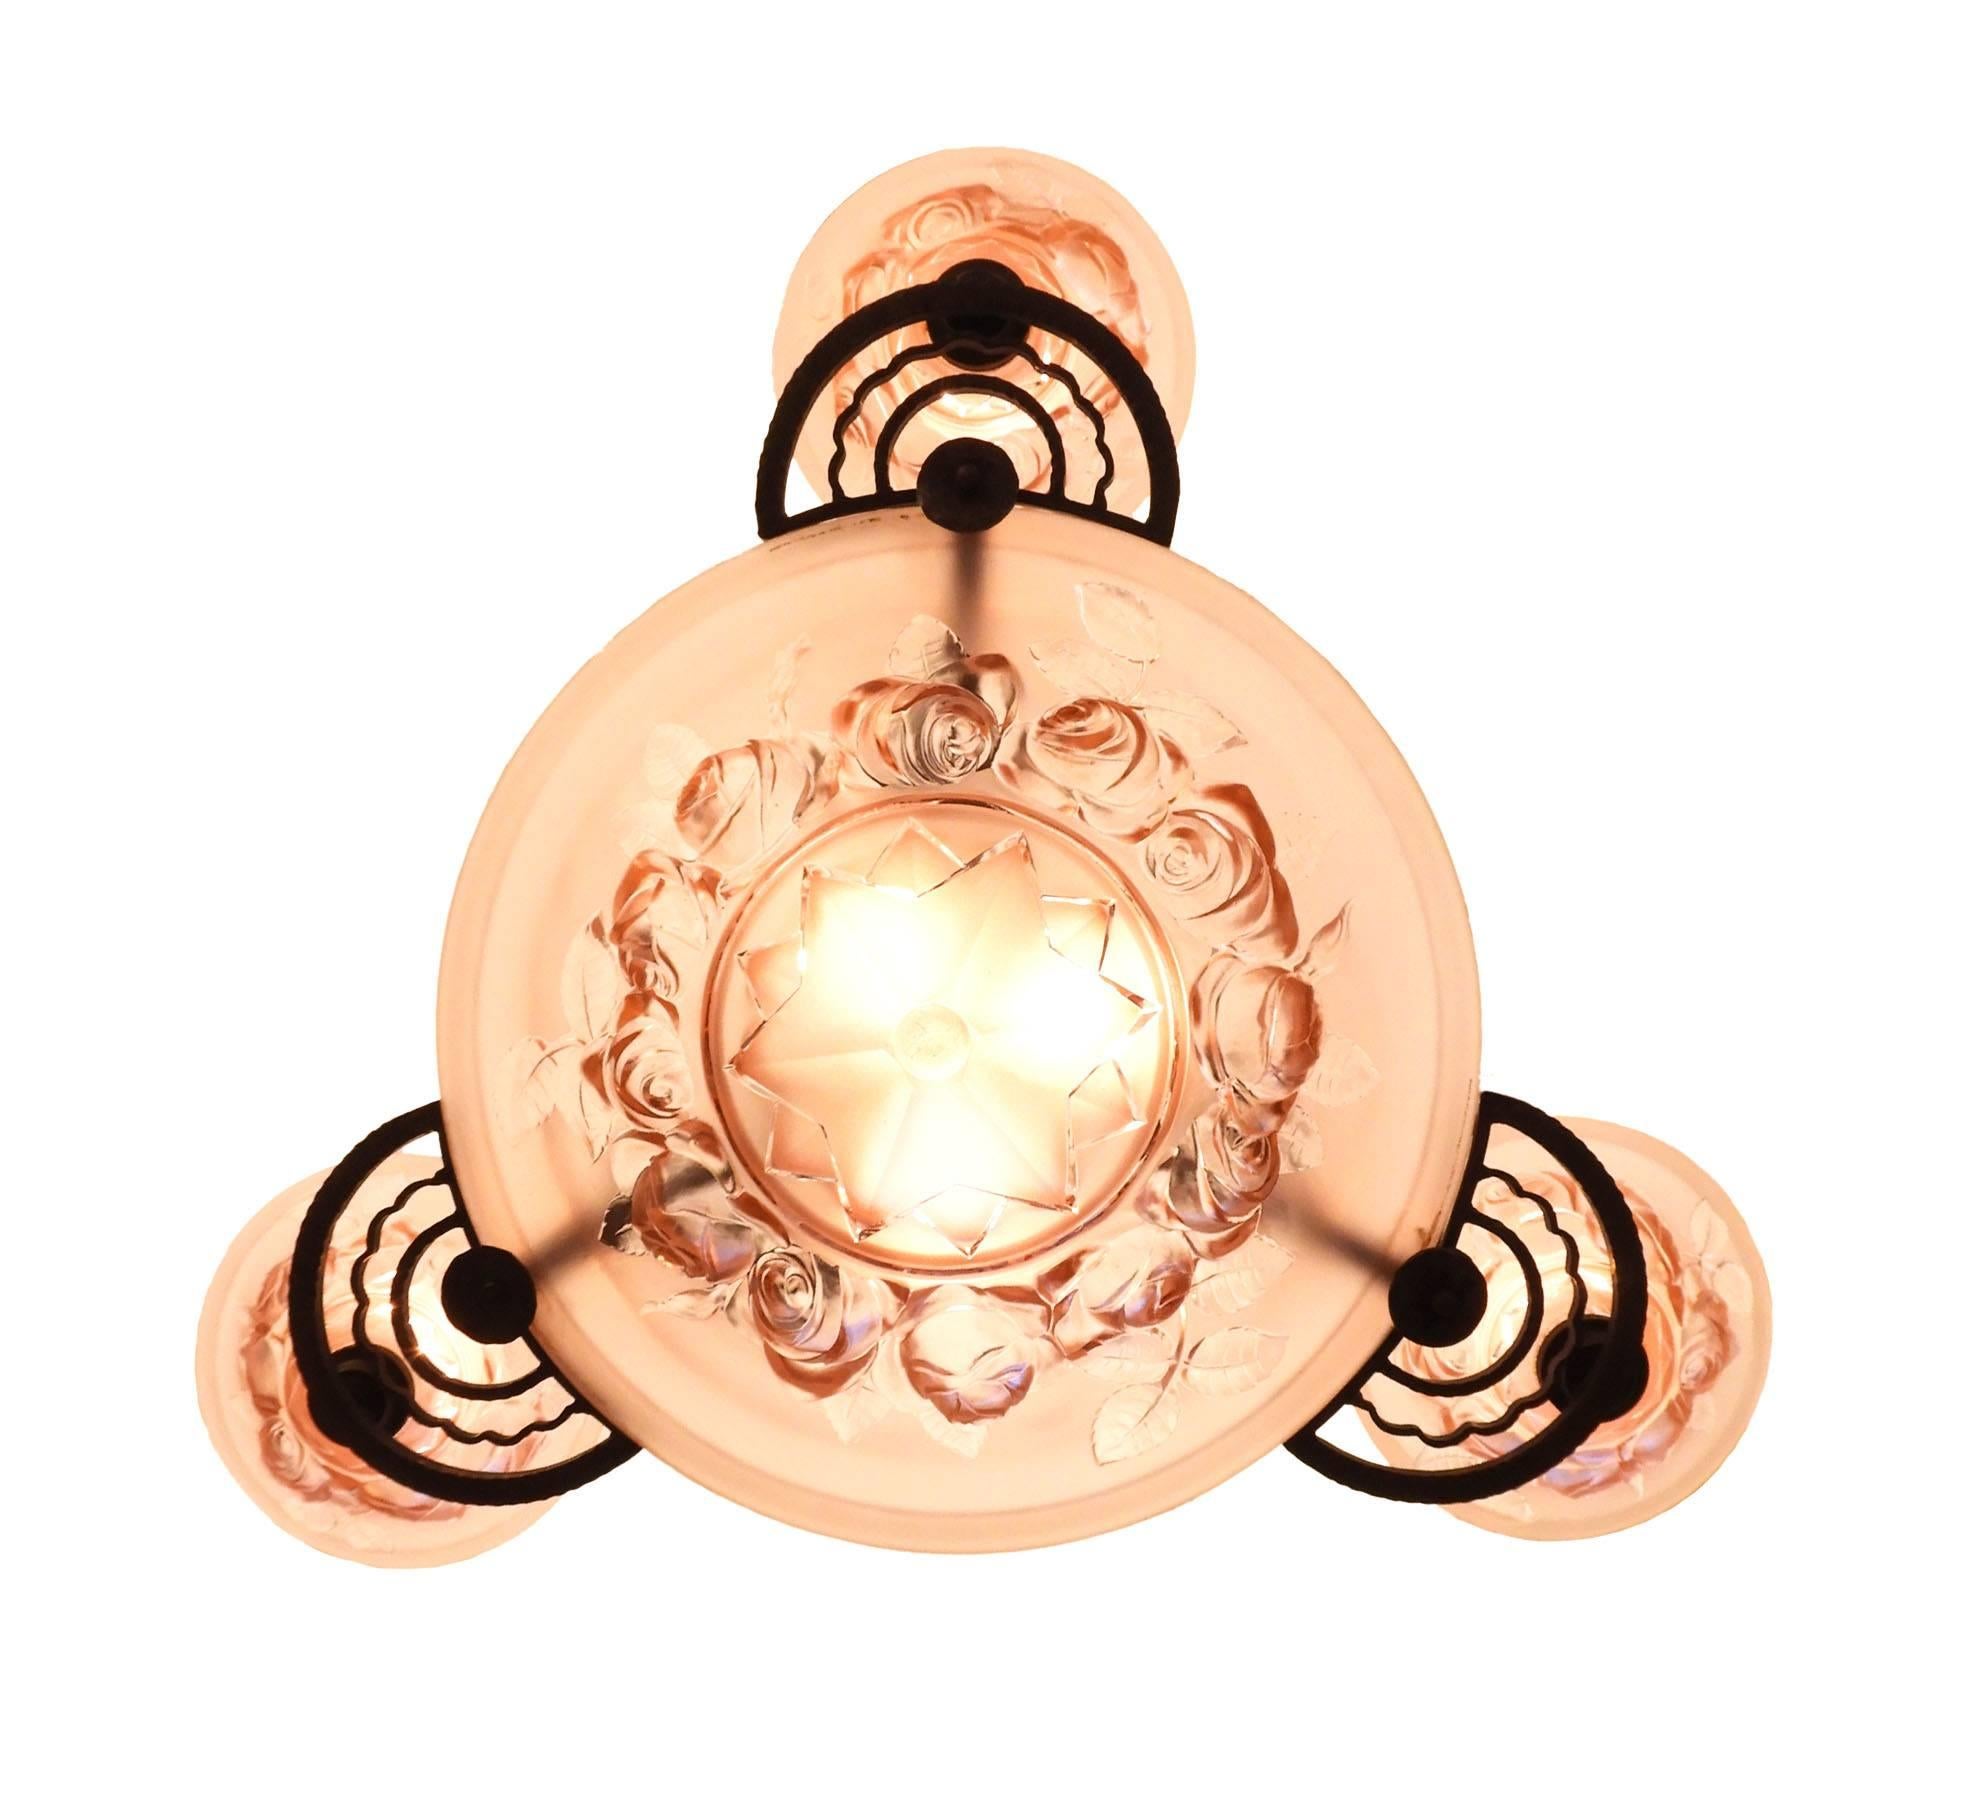 Art Deco chandelier Edgar Brandt inspired wrought iron ceiling fixture
French frosted rose glass bowls, circa 1930.
This French Art Deco chandelier features handcrafted wrought iron possibly by Edgar Brandt
with a large central glass bowl and